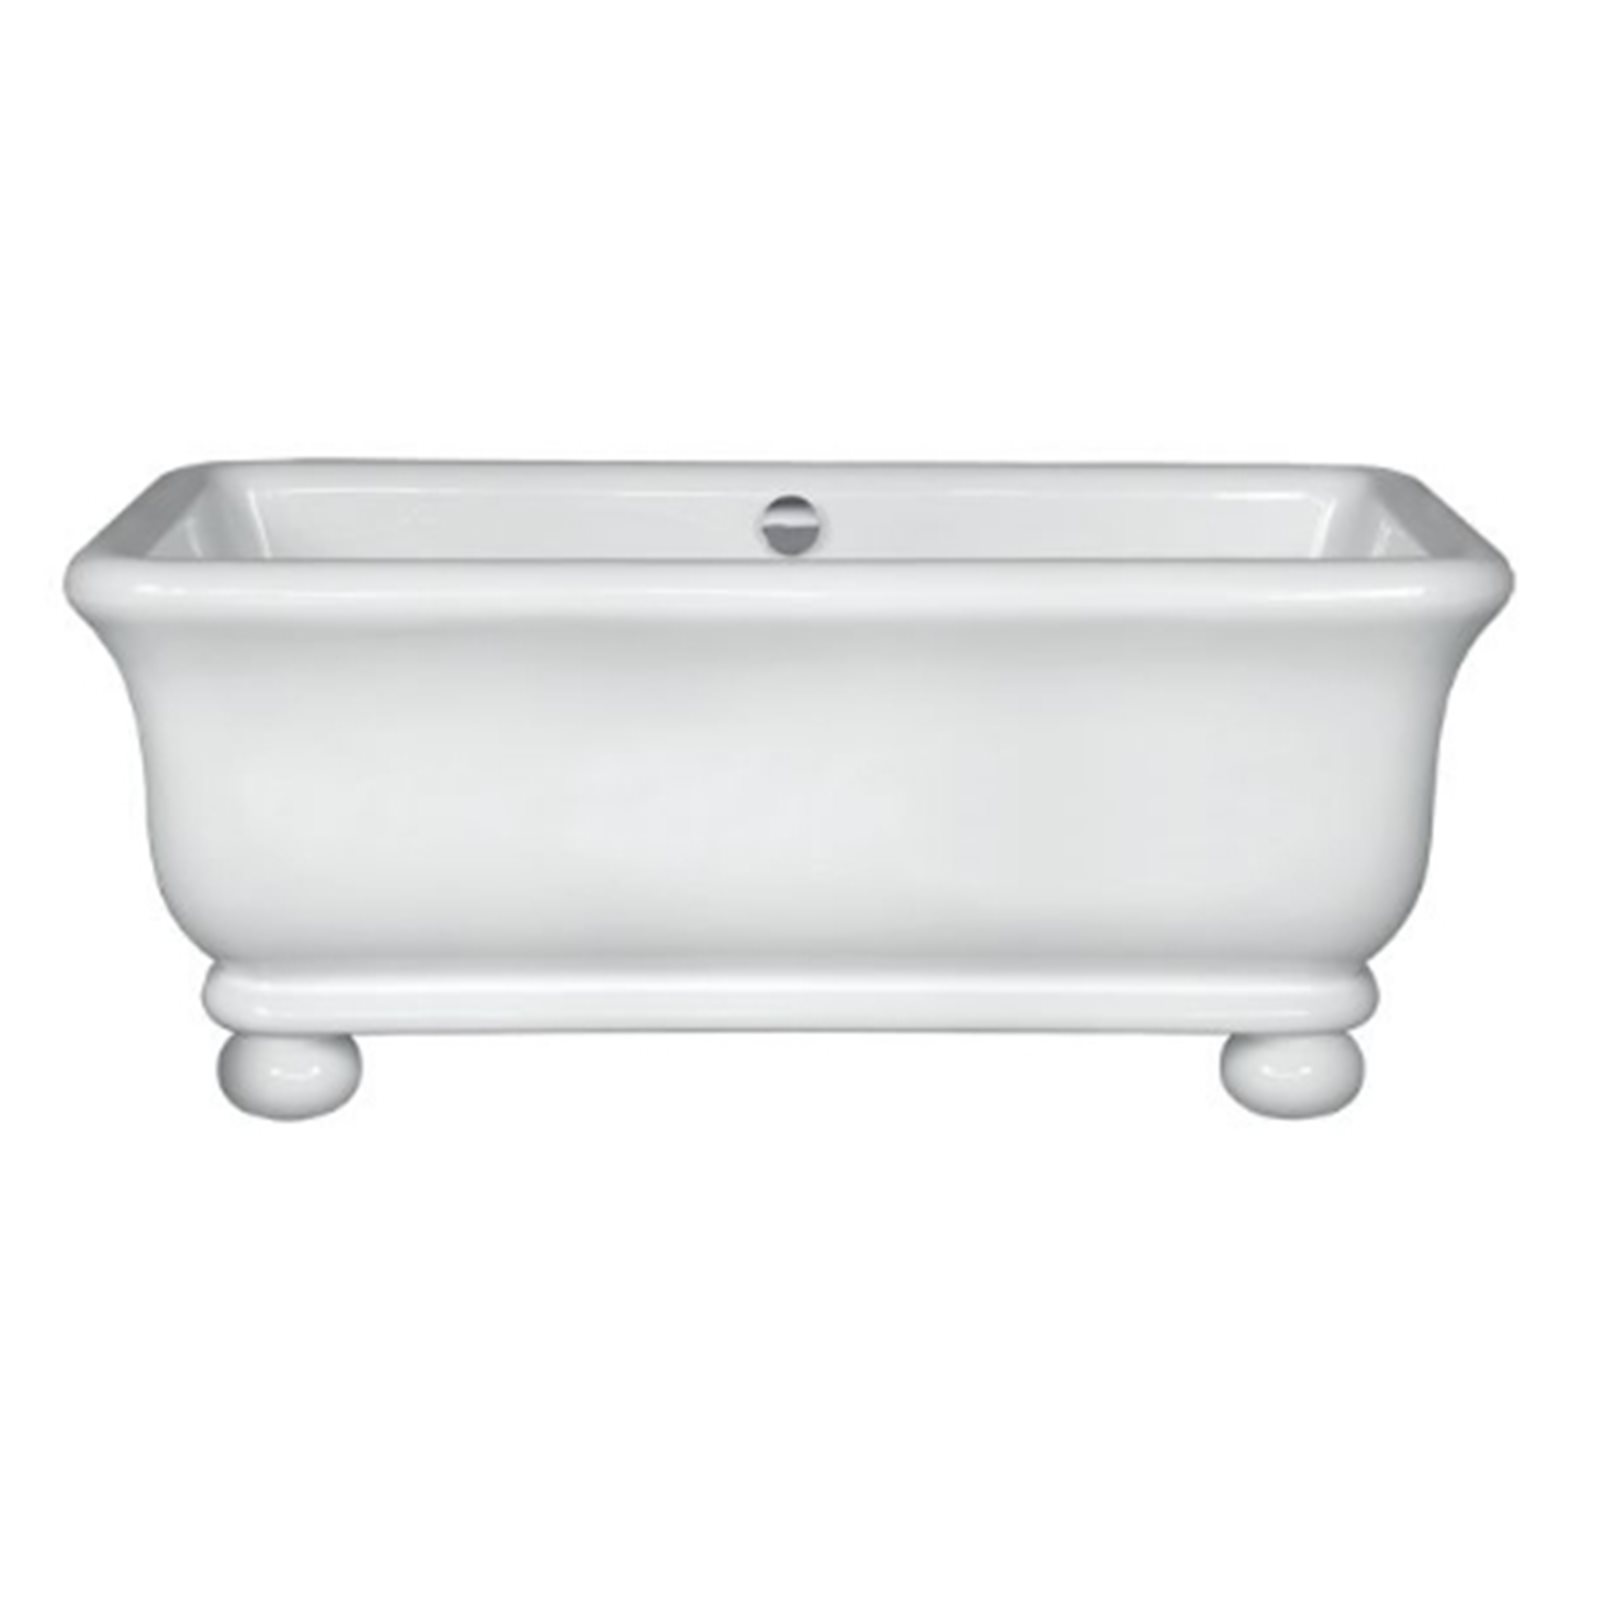 Classic Freestanding Bath double ended on Feet Image